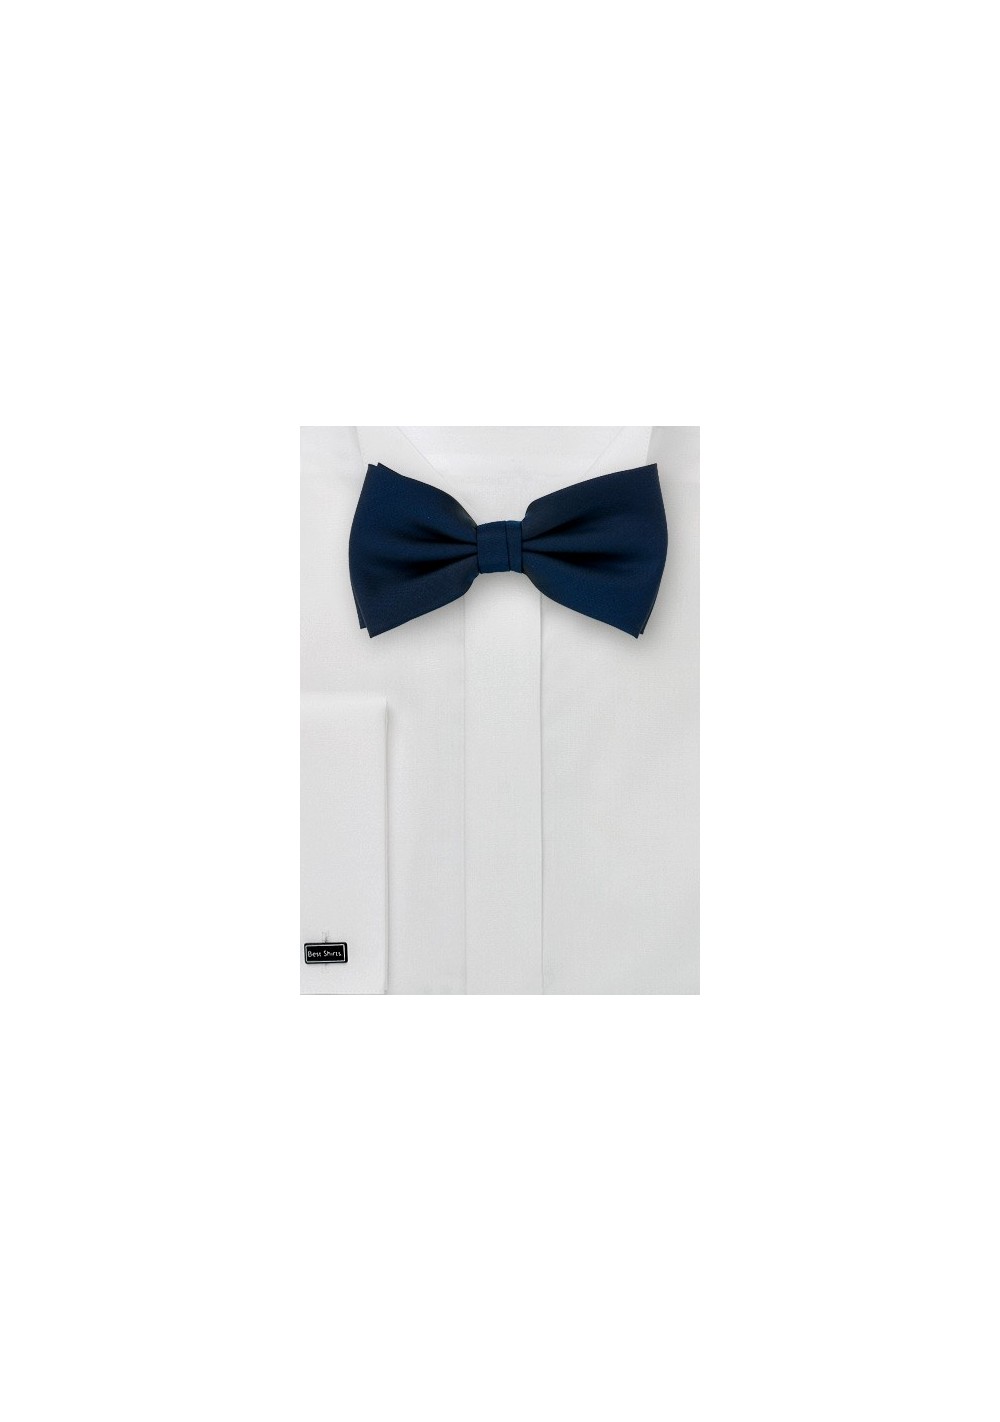 Midnight Blue Bow Ties - Bow Tie Set With Matching Pocket Square